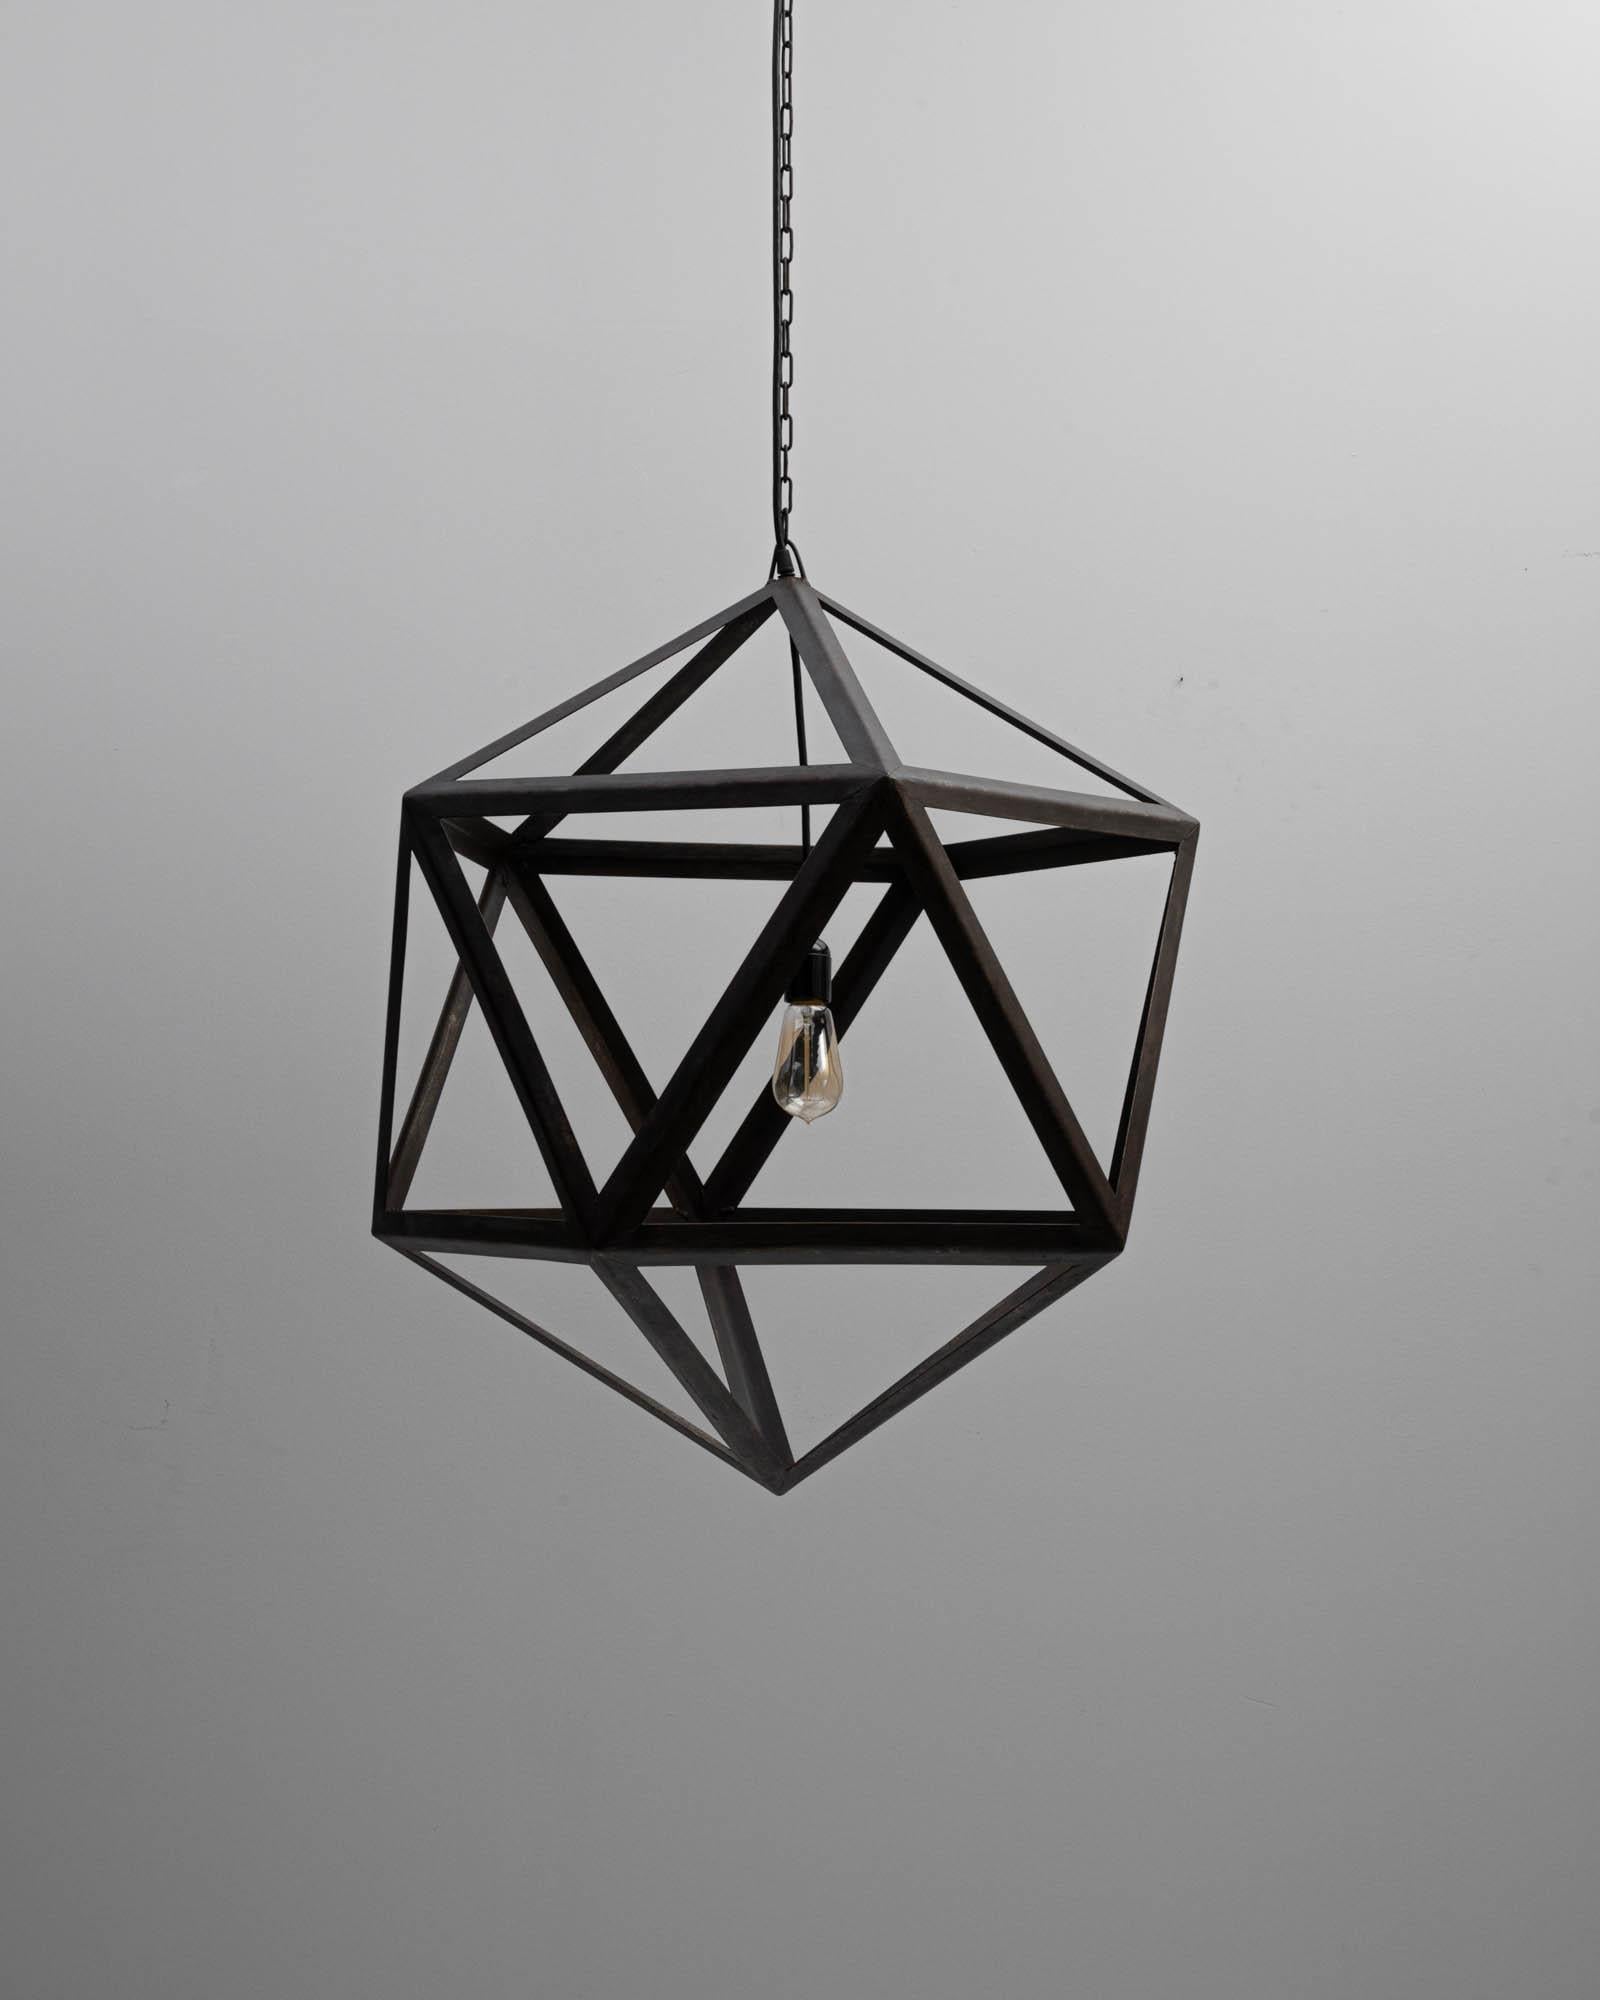 A prototype created in our atelier, this platonic pendent is created entirely from welded steel angle rods. The star-like icosahedron design of this lamp creates a pleasing network of geometric shadows, which gleam on the walls around it. Industrial